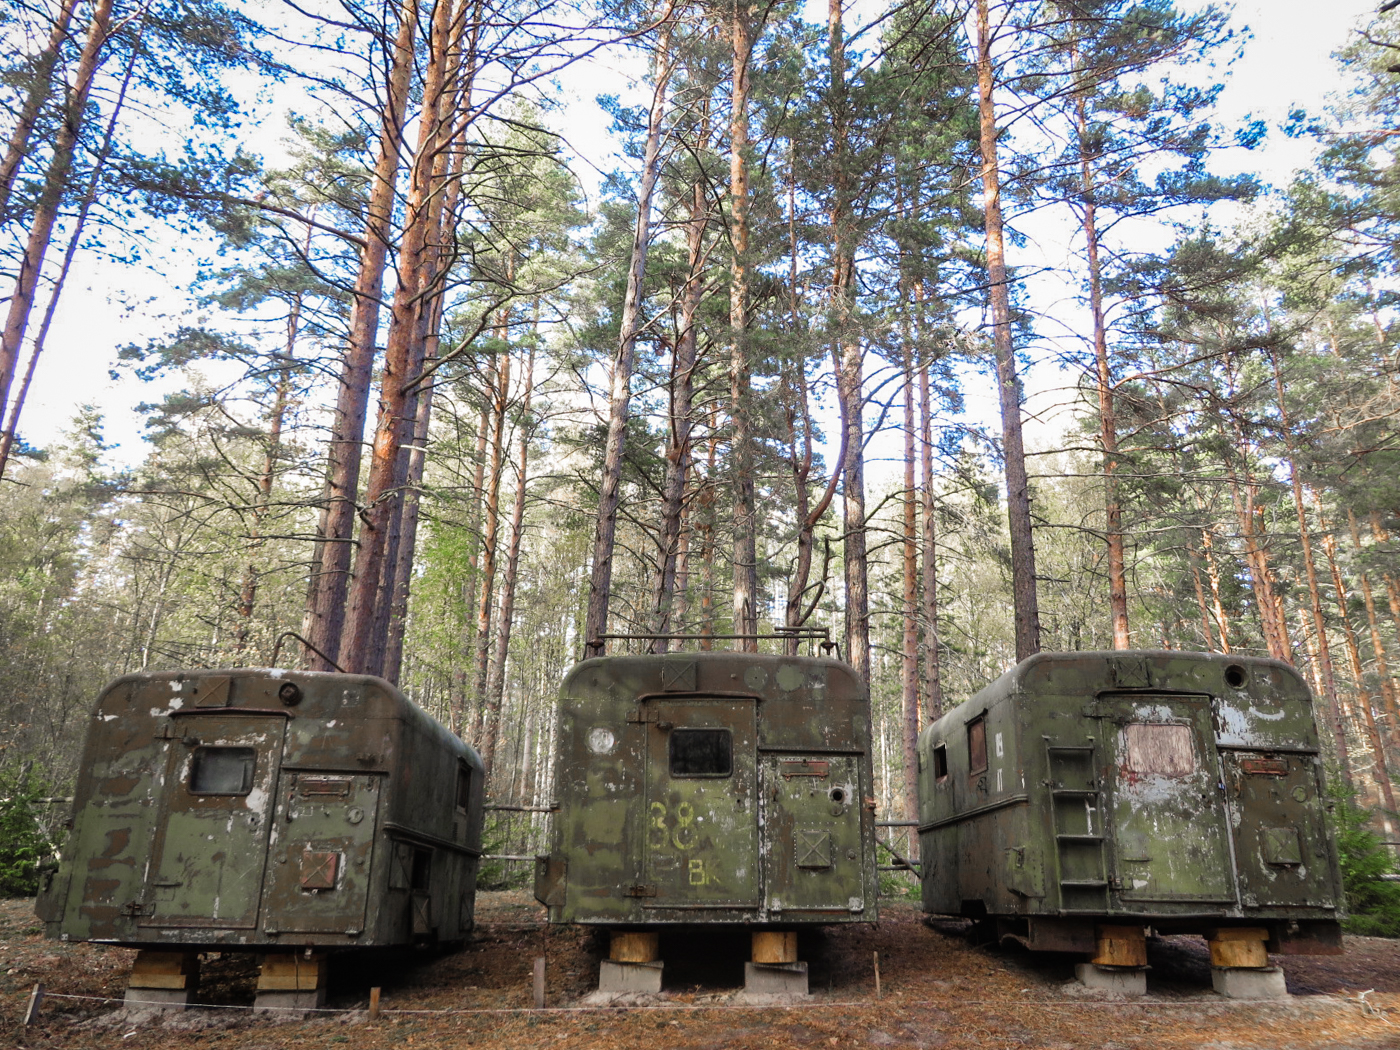 the world war II tanks in a forest in Russia